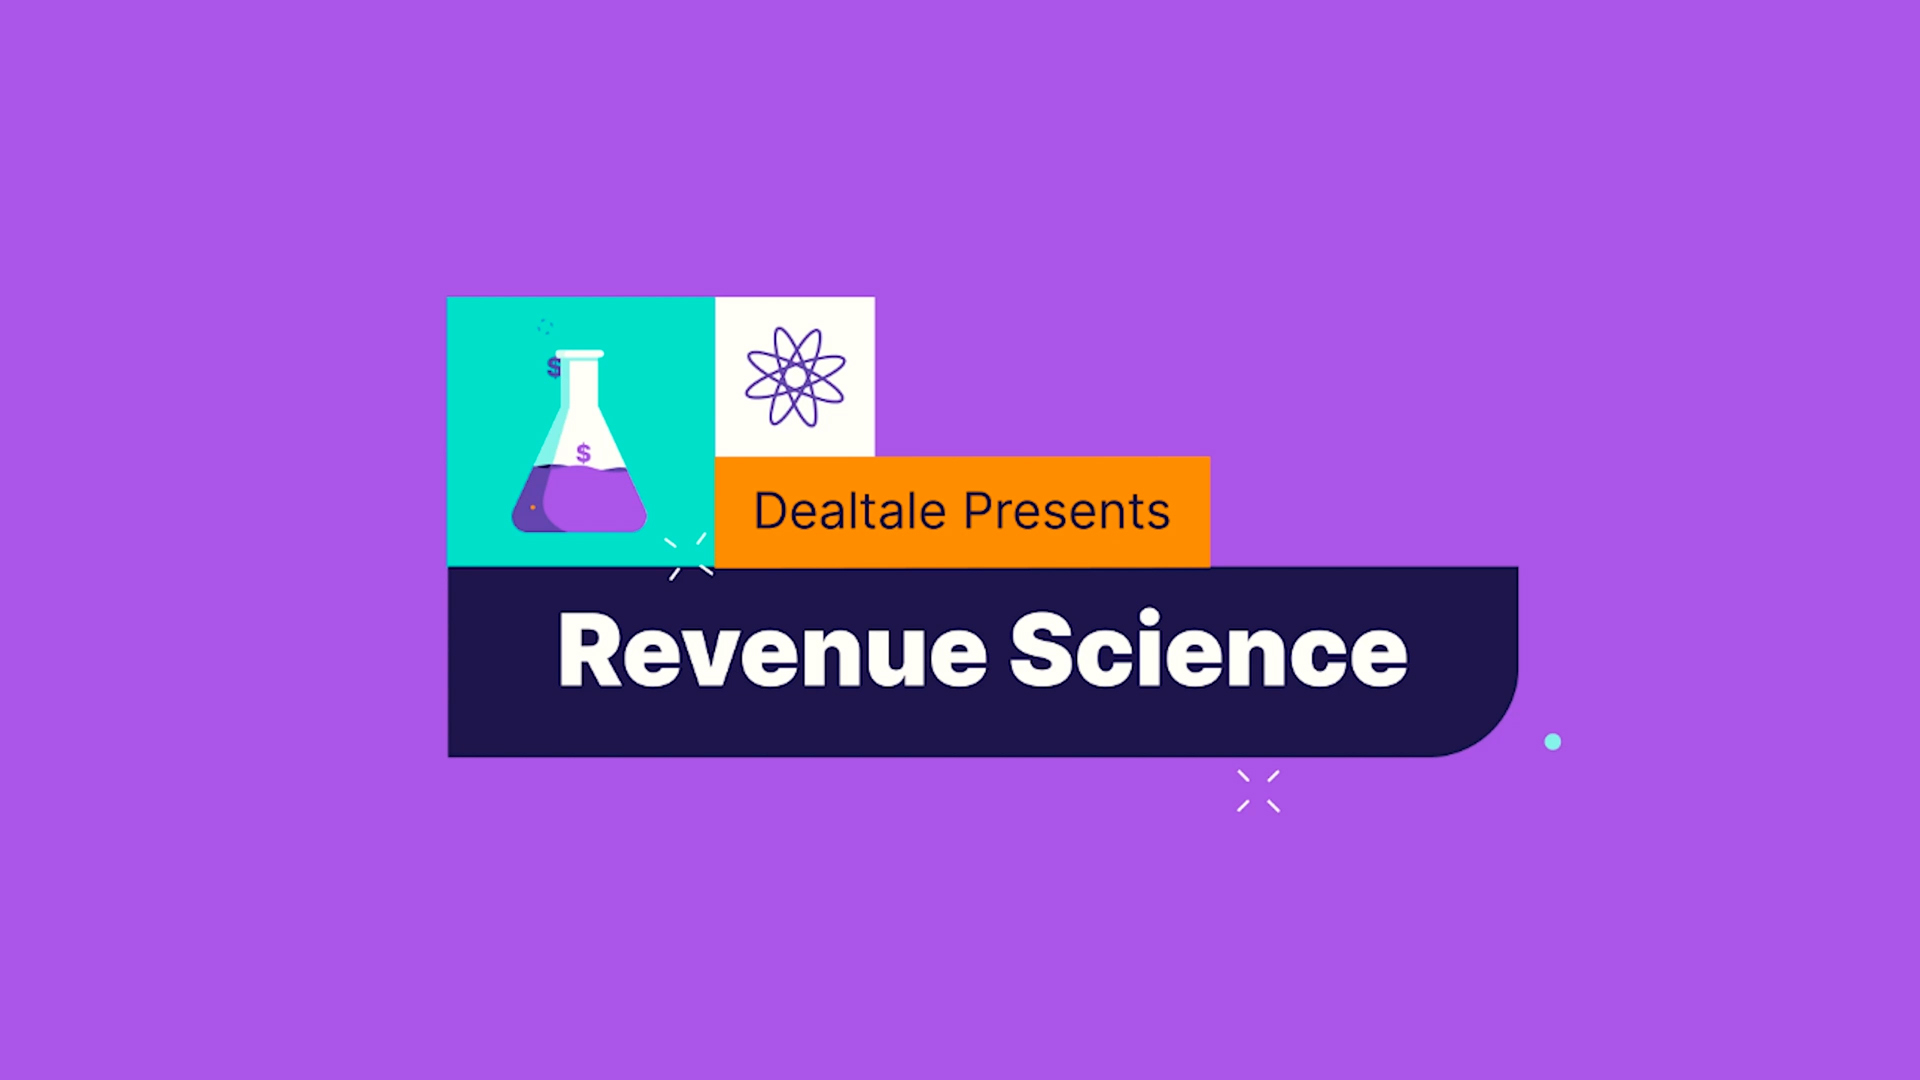 Totaling four episodes, the inventive series educates viewers about revenue science in engaging and entertaining ways. Leveraging colorful nods to pop culture, relatable content and real-life scenarios, Dealtale's creative team brought revenue science stories to life, making complex data concepts accessible and engaging for viewers.